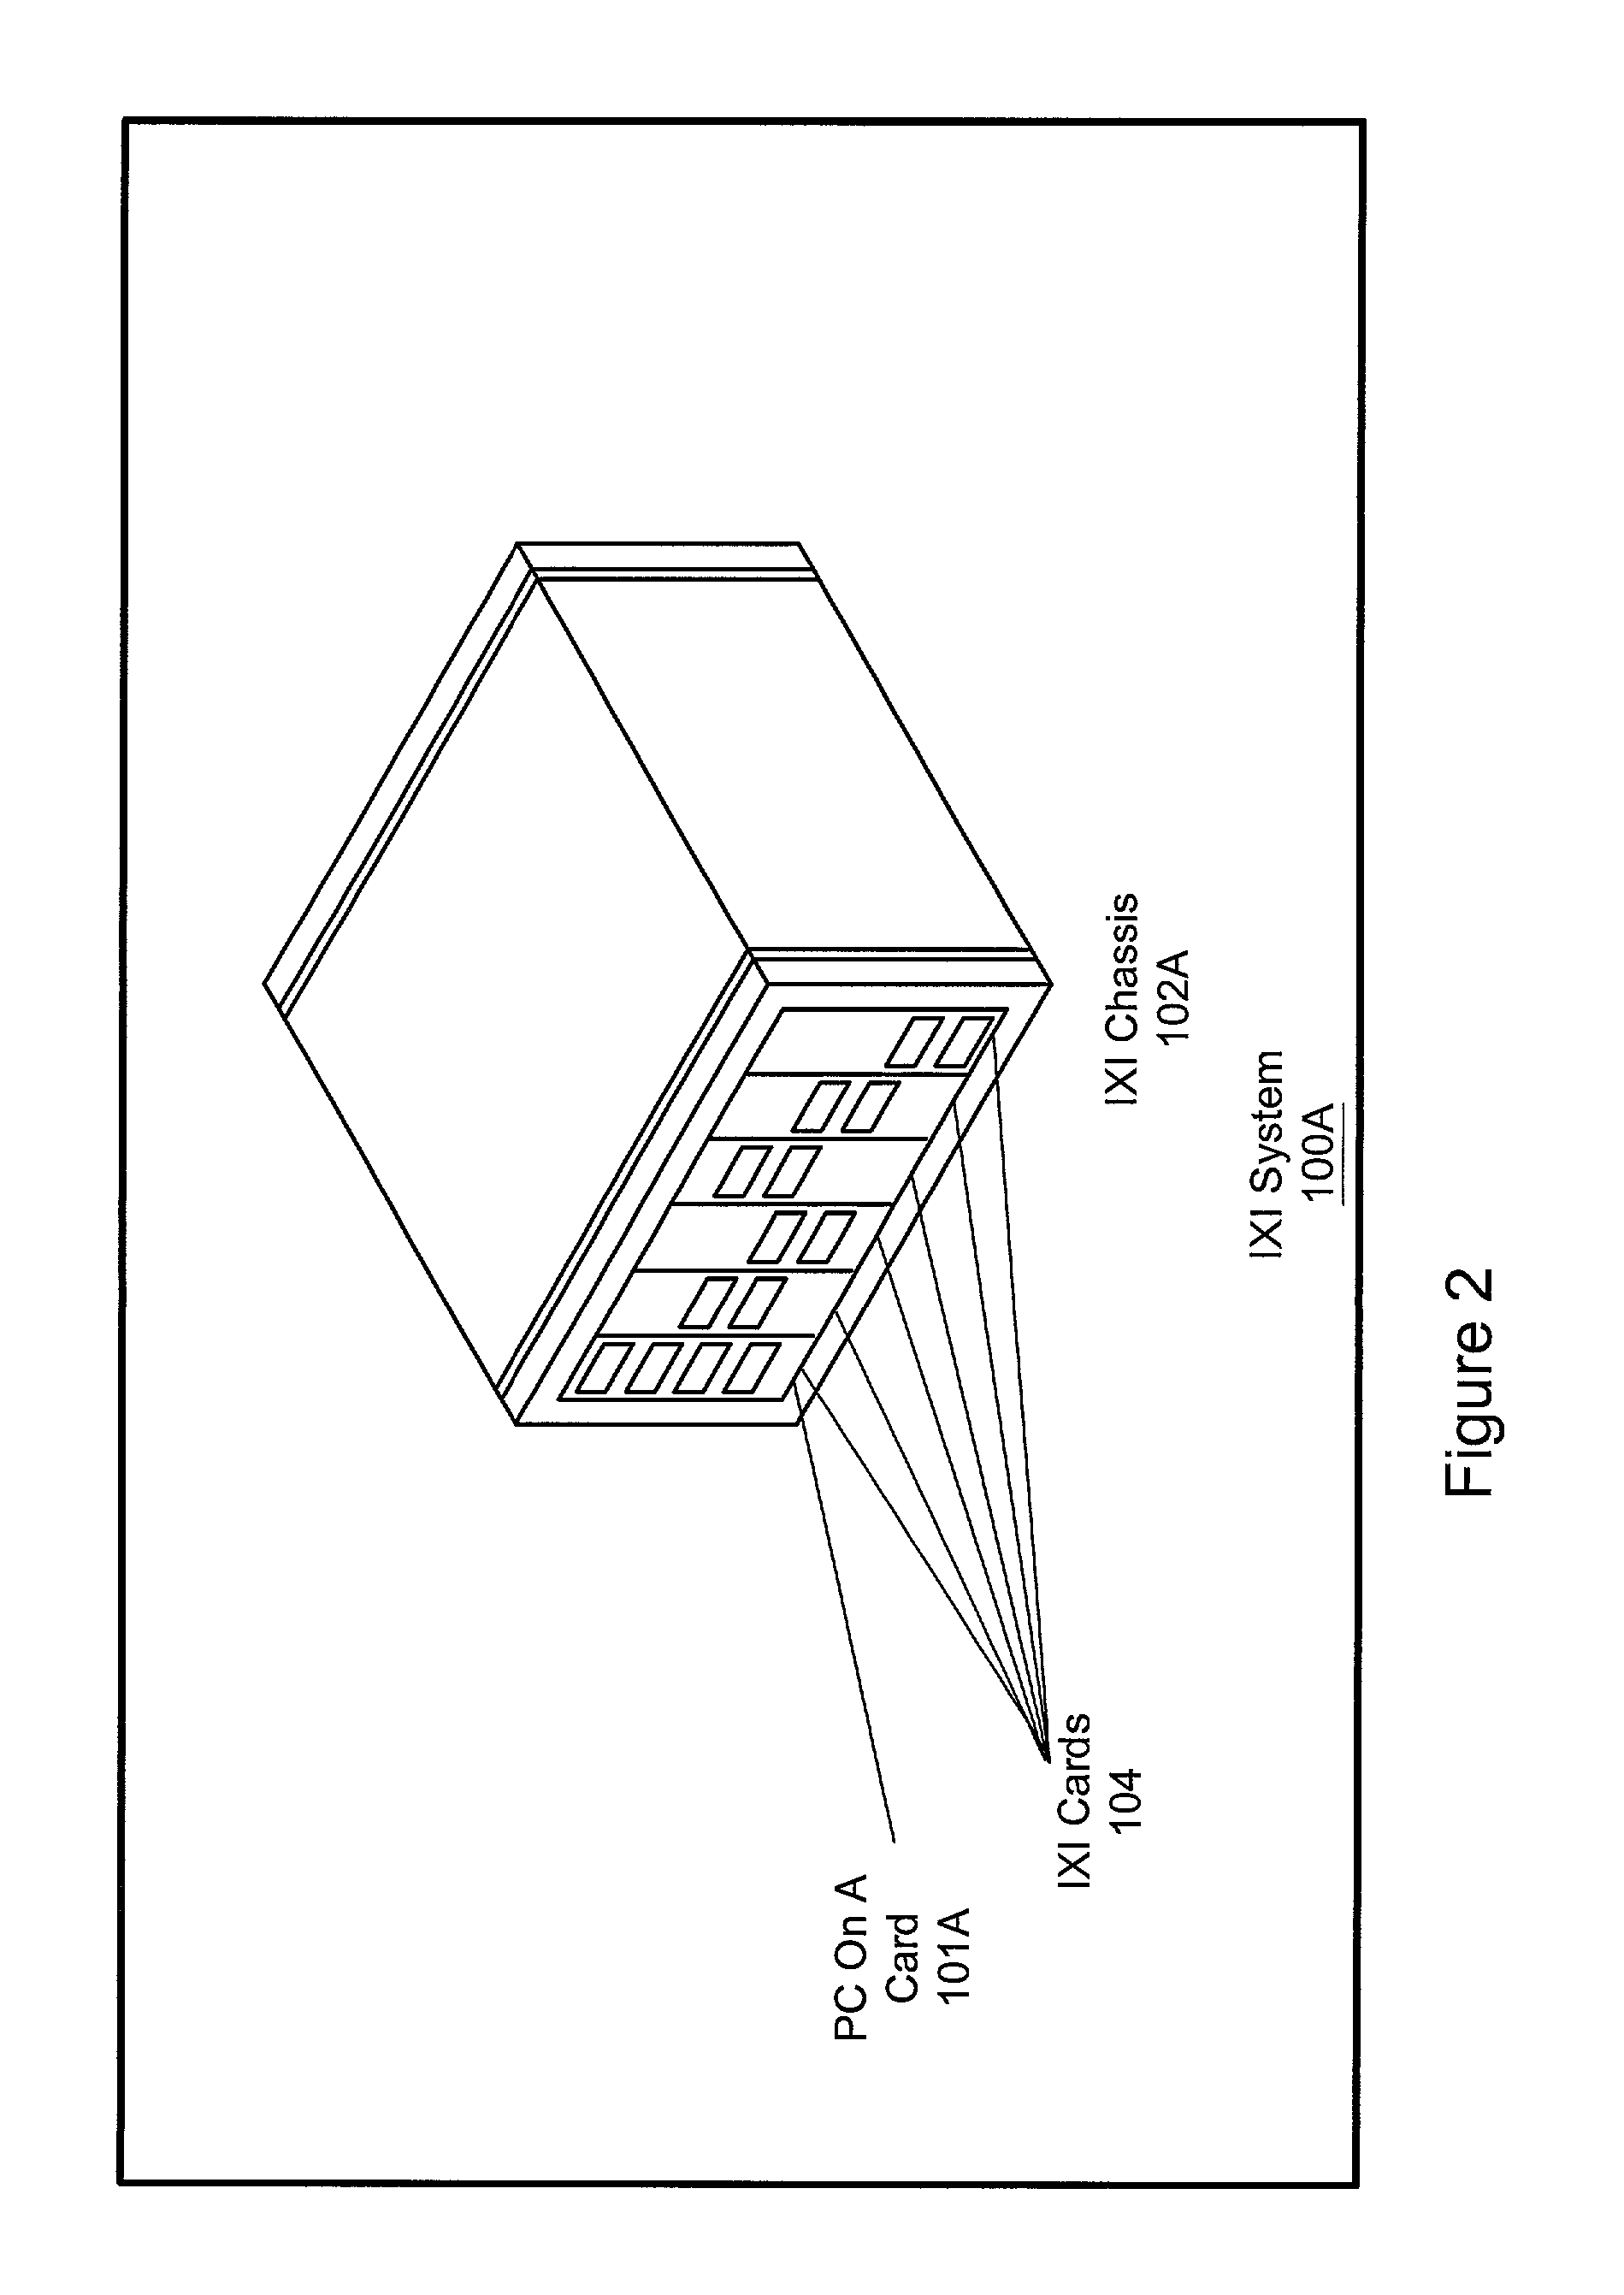 Instrumentation system including a backplane having a switched fabric bus and instrumentation lines